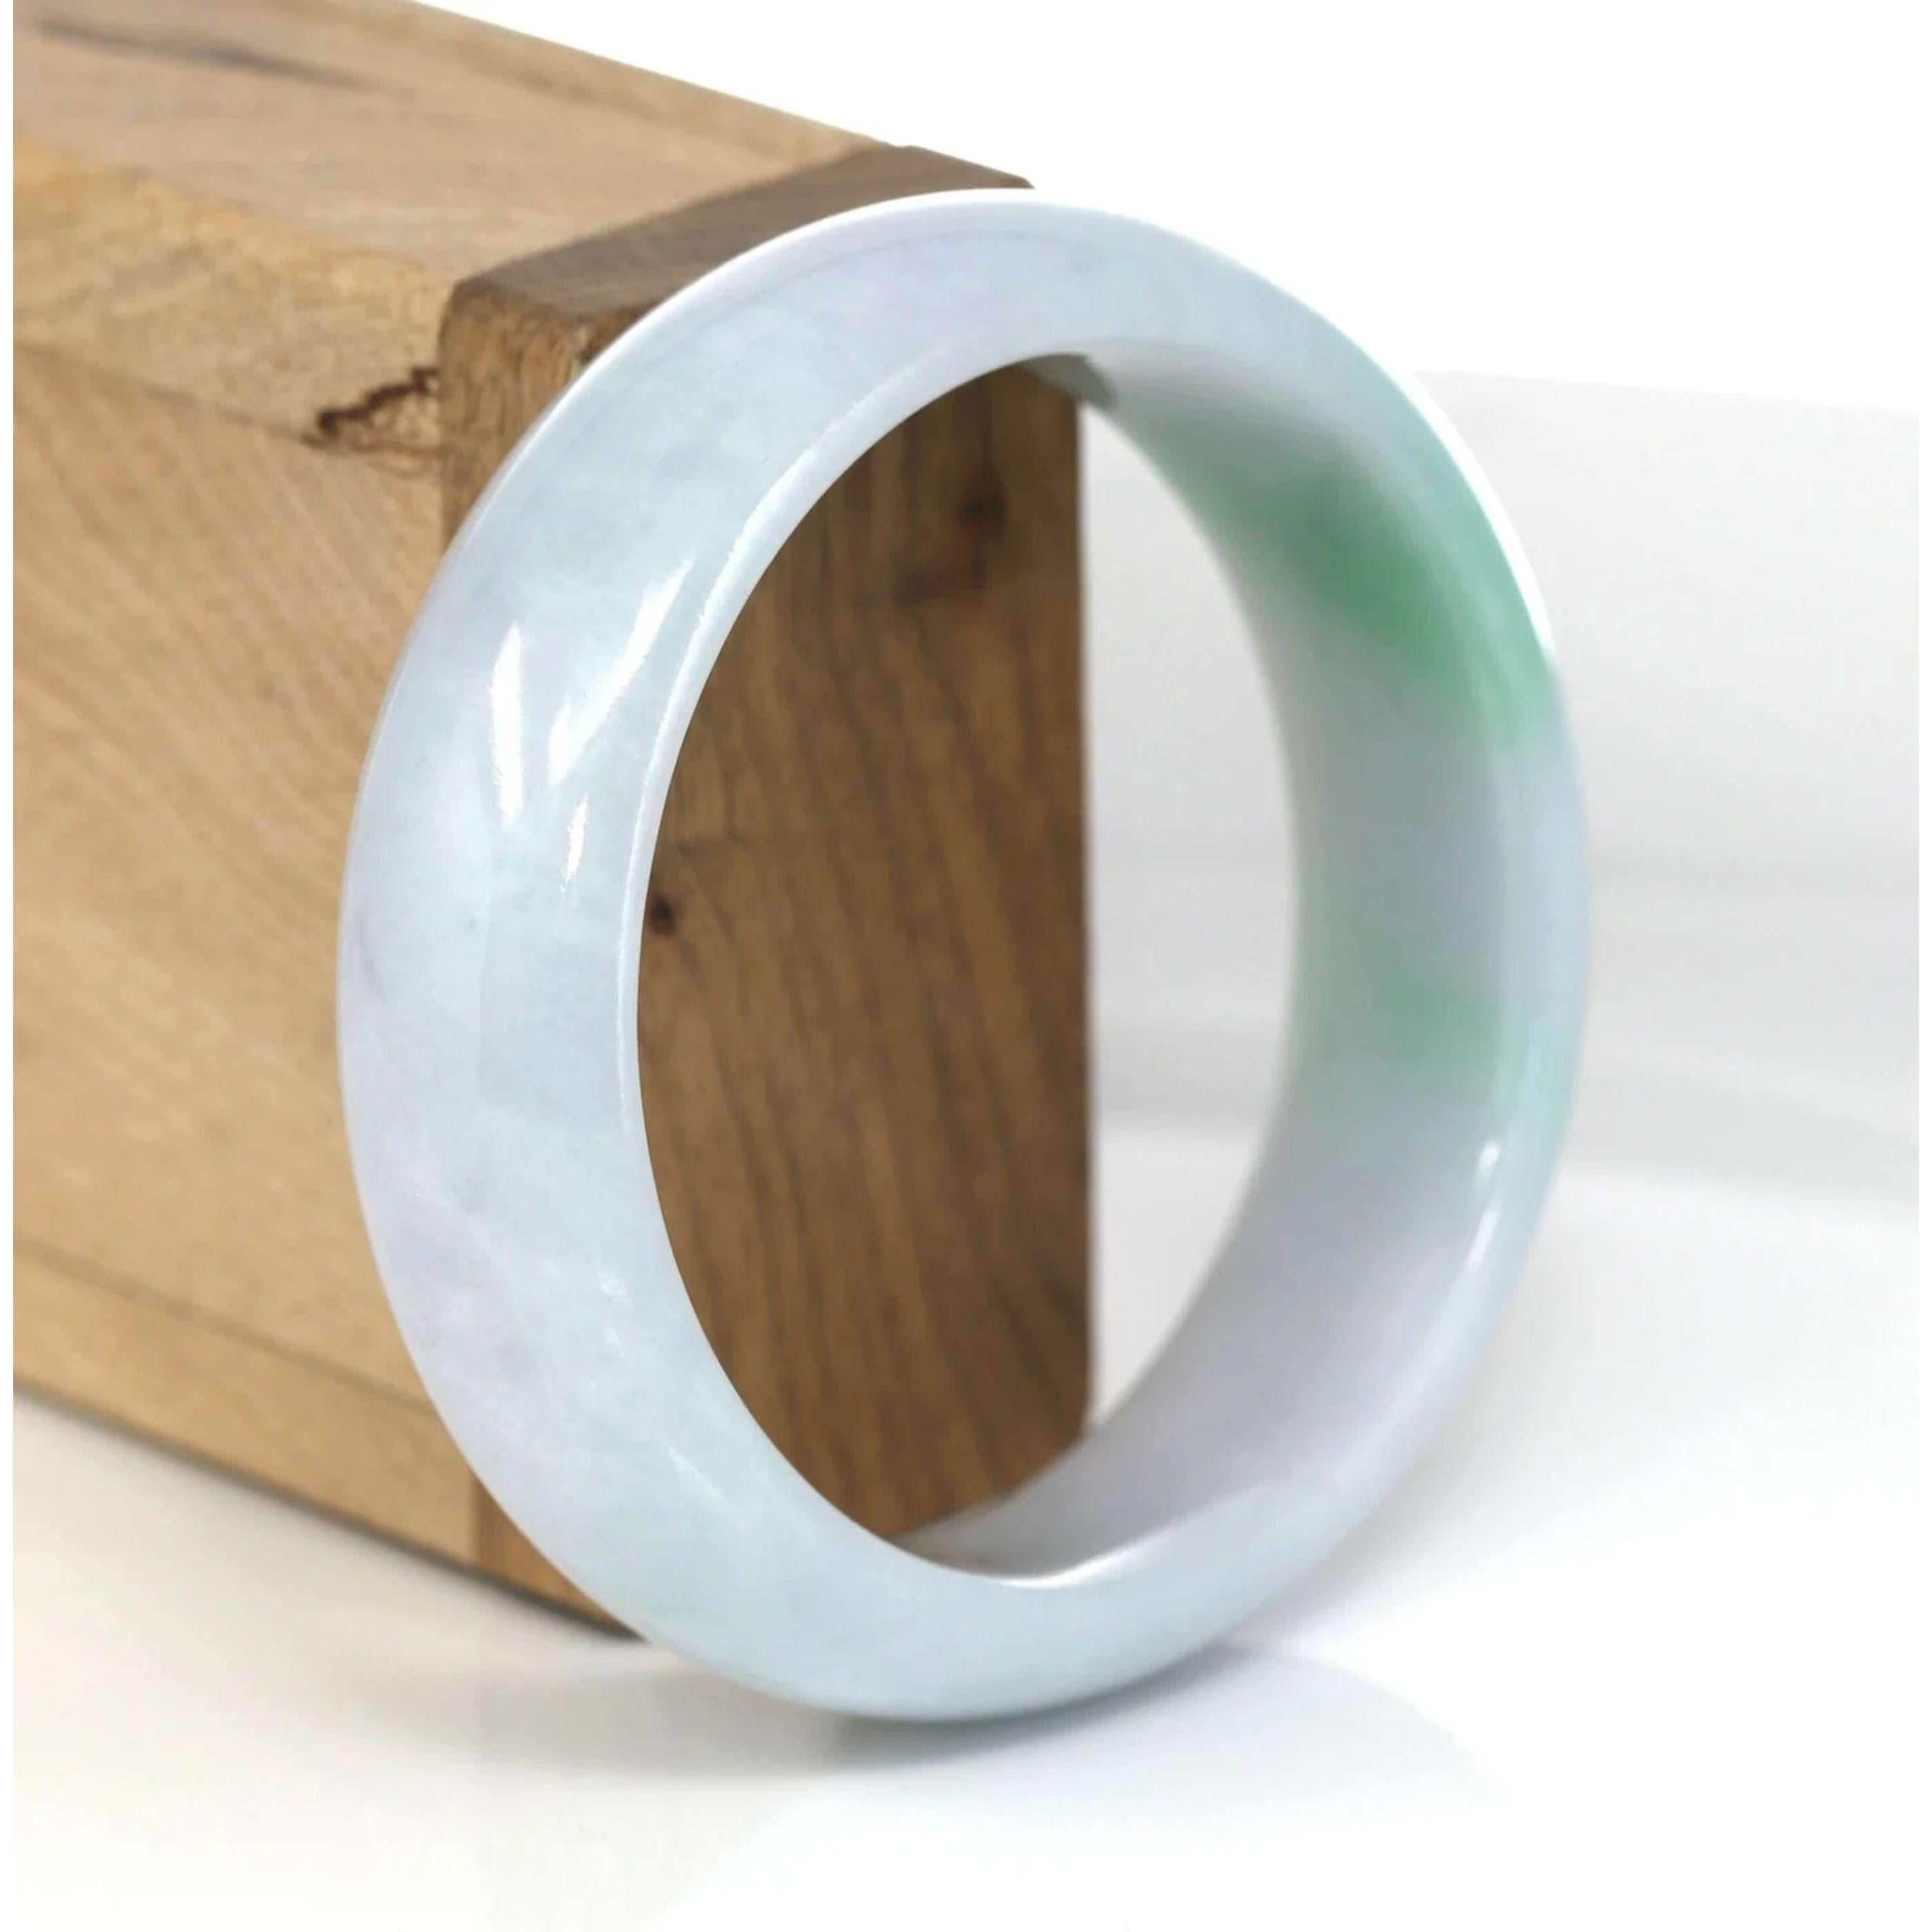 * DETAILS--- Genuine Burmese Jadeite Jade Bangle Bracelet. This bangle is made with fine genuine Burmese Jadeite jade. The jade texture is very good and smooth with green-lavender color. It is a luxury and perfect bangle. The Classic half-round